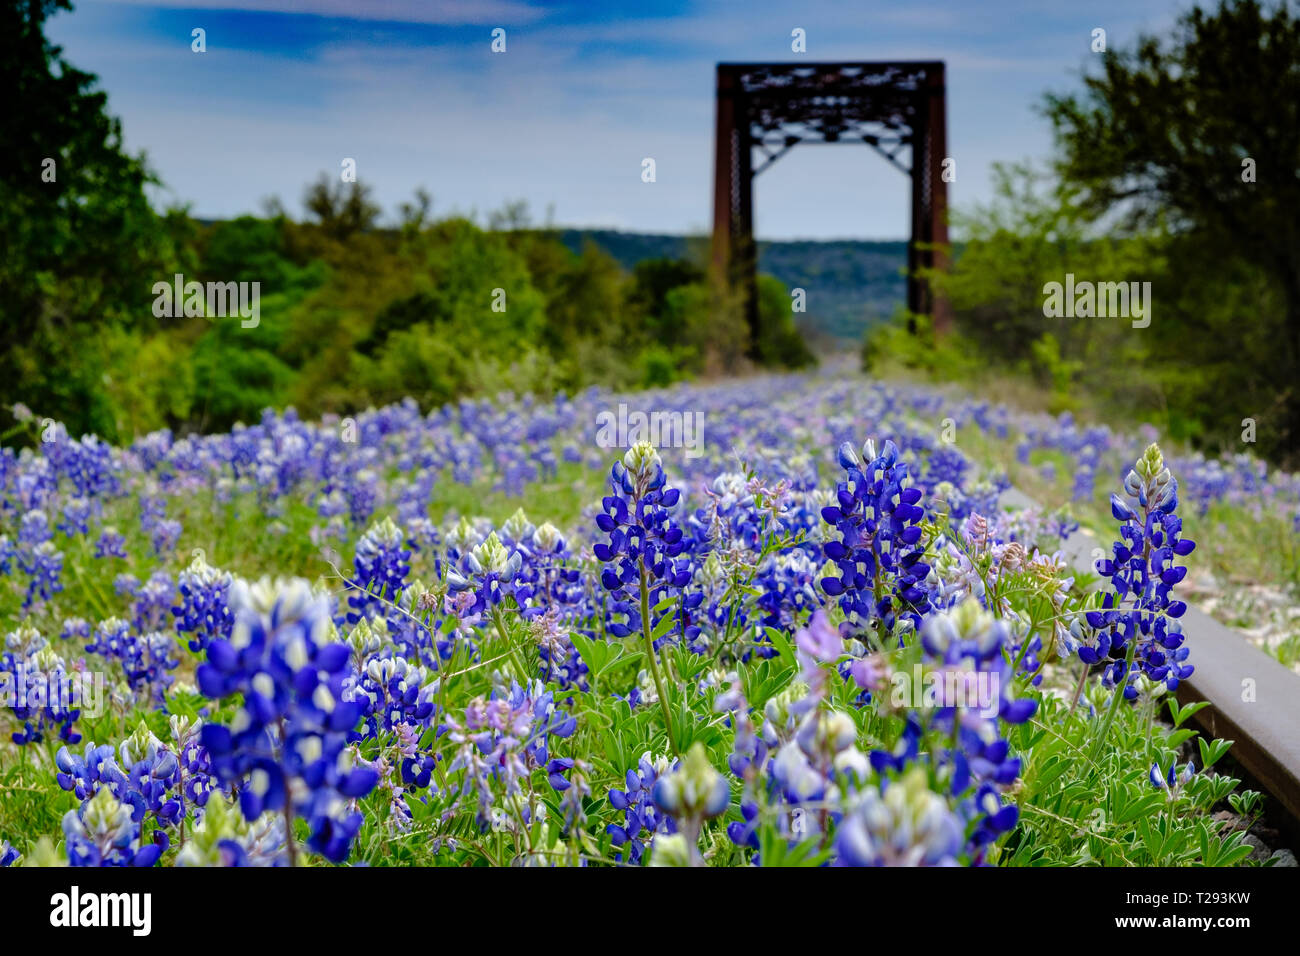 Bluebonnets bloom along abandoned railroad tracks in the Texas Hill Country between Austin and San Antonio. USA. Stock Photo